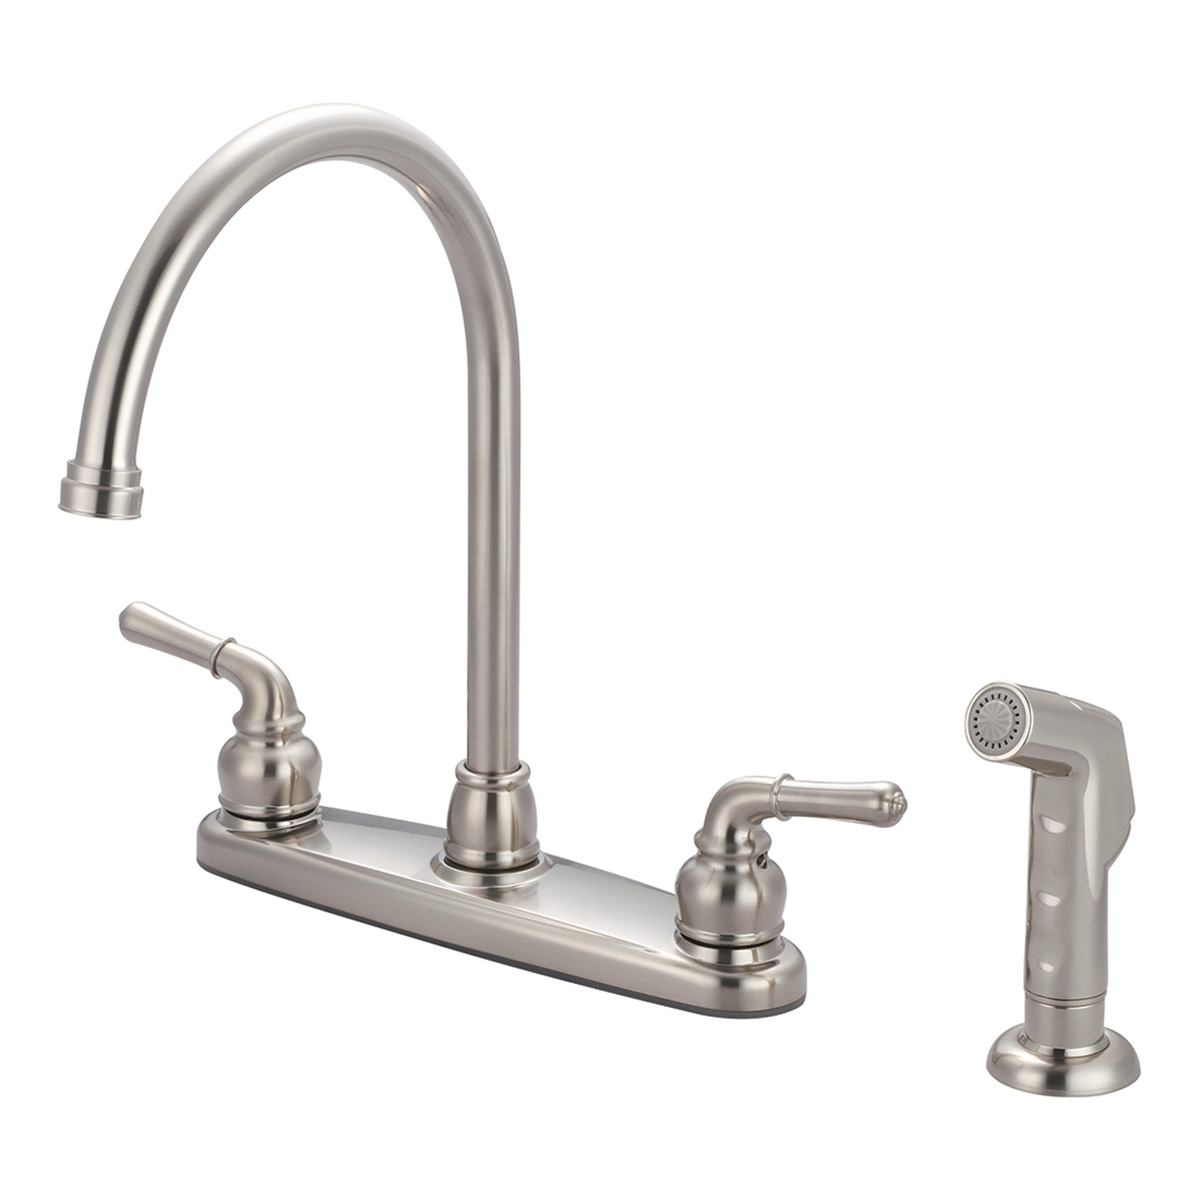 Picture of Accent K-5342-BN Two Handle Kitchen Faucet - Brushed Nickel